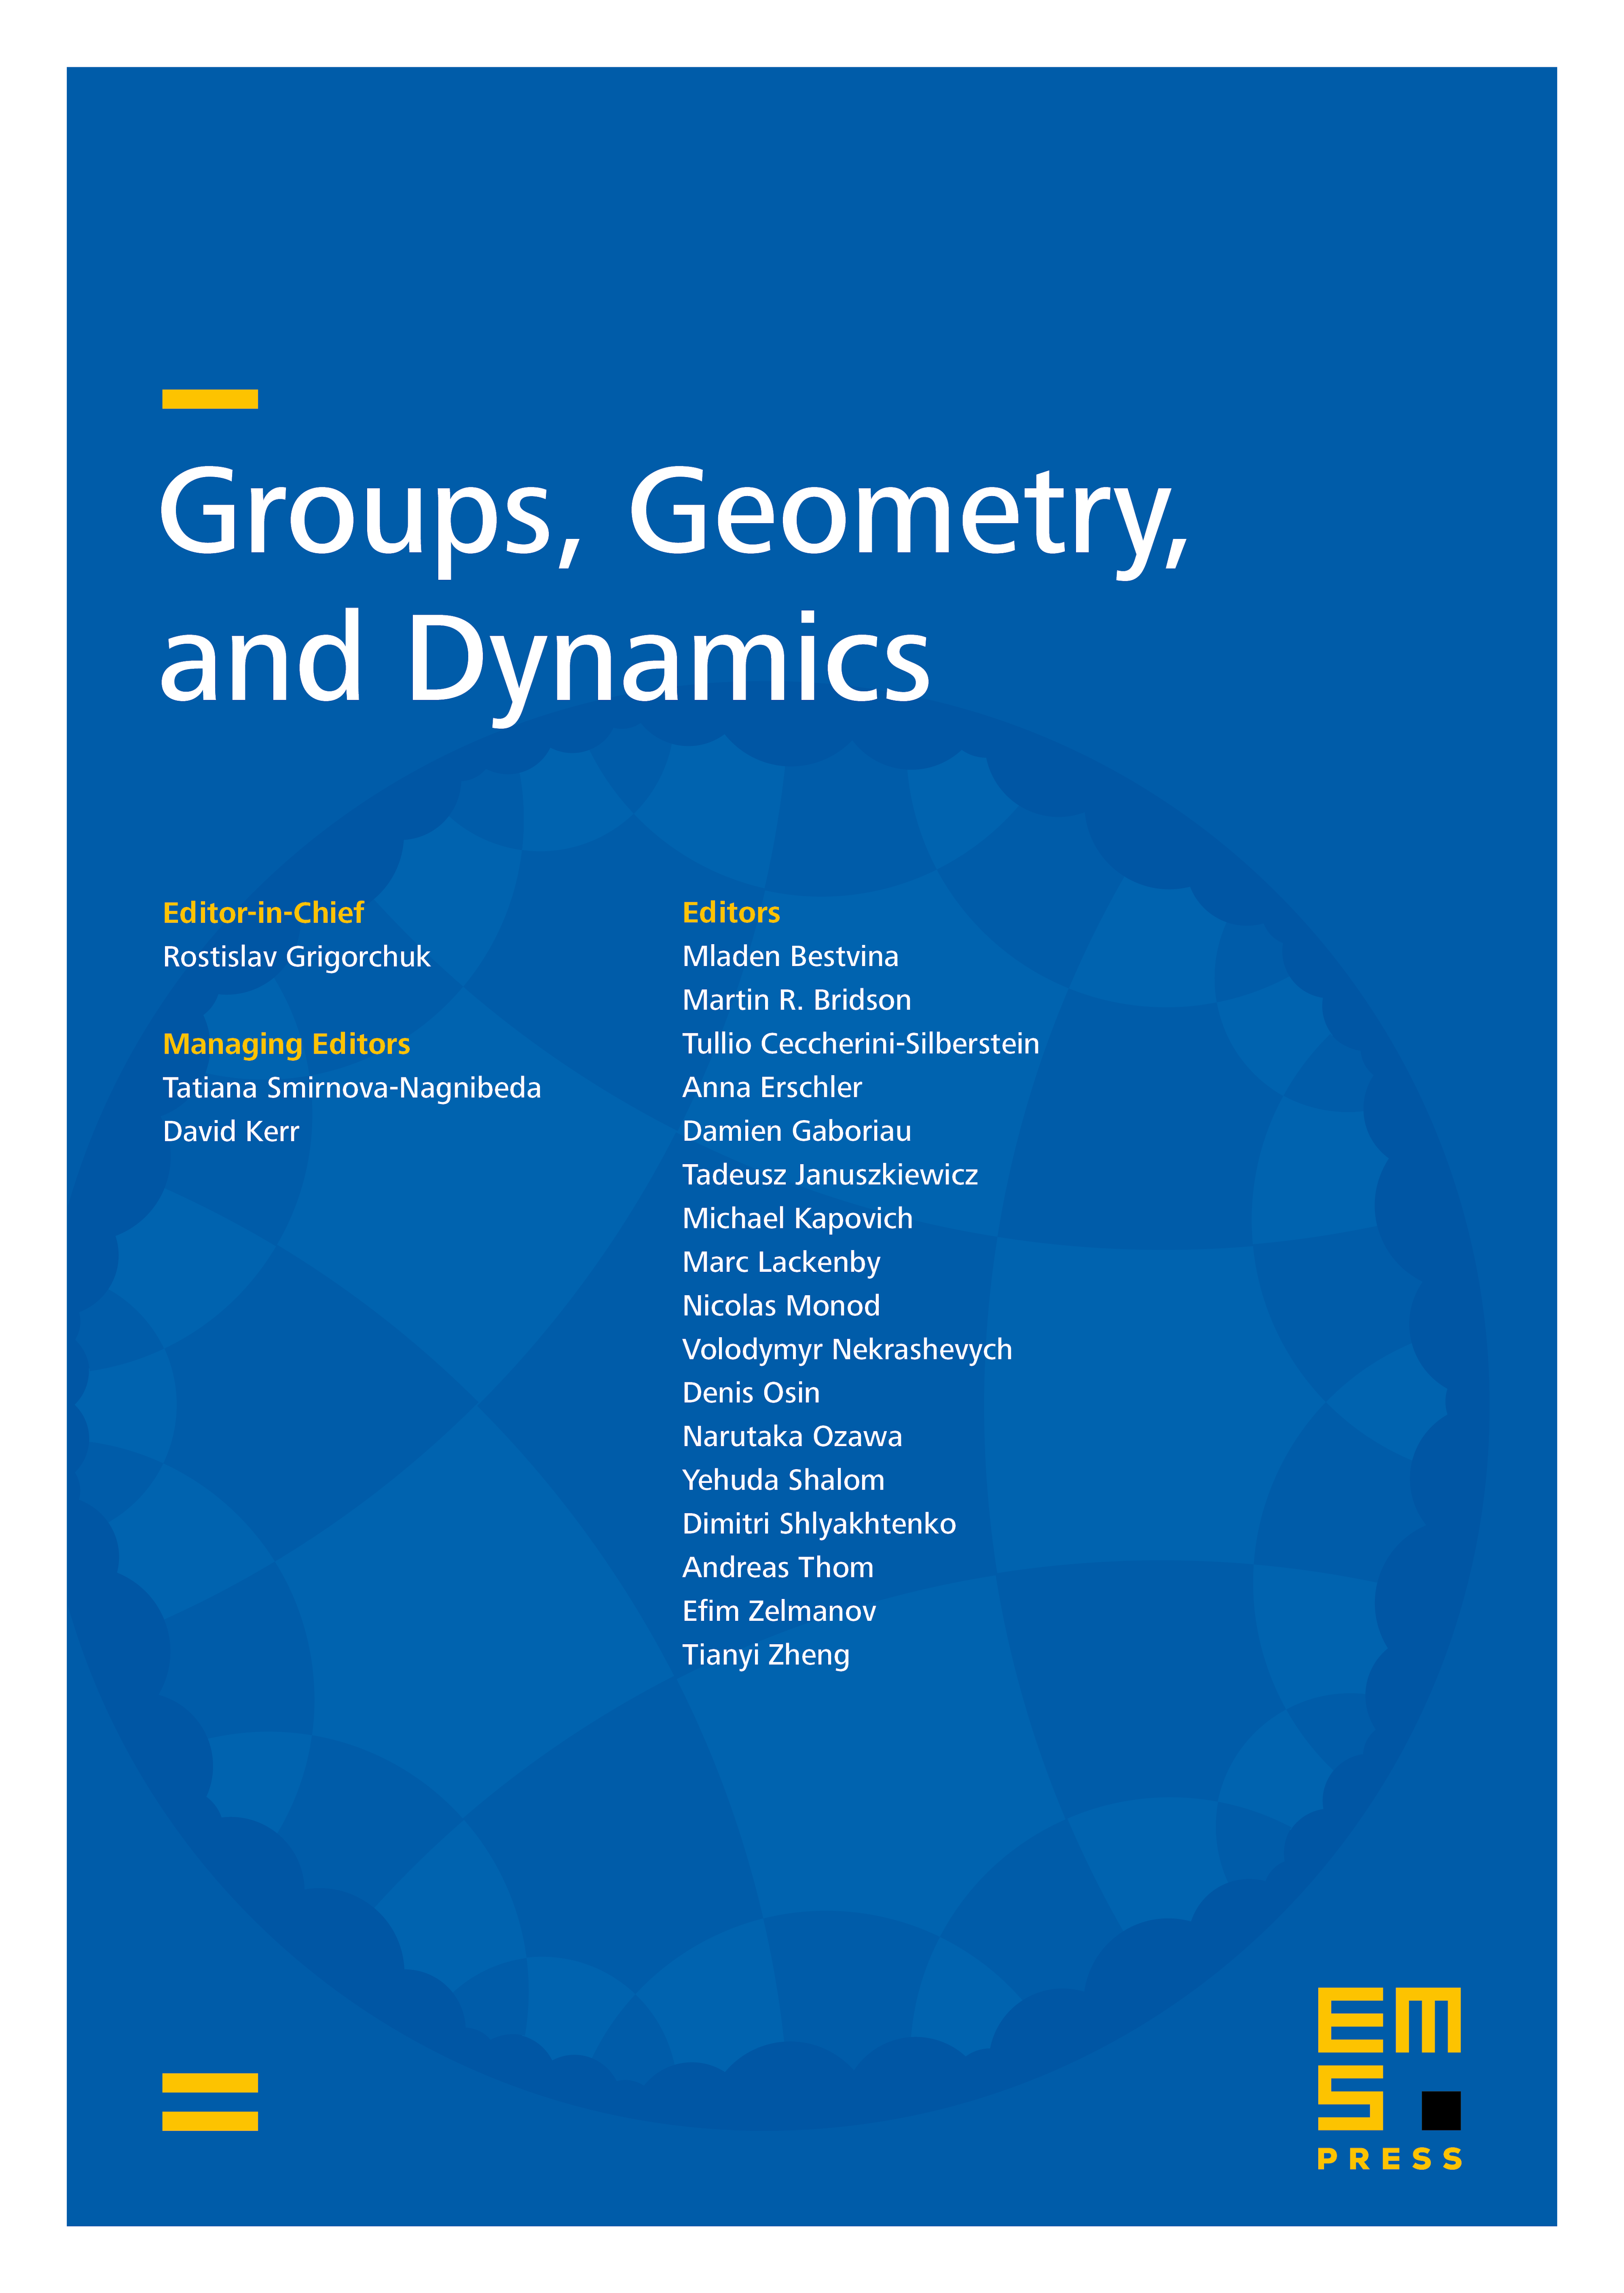 Full groups of Cuntz–Krieger algebras and Higman–Thompson groups cover